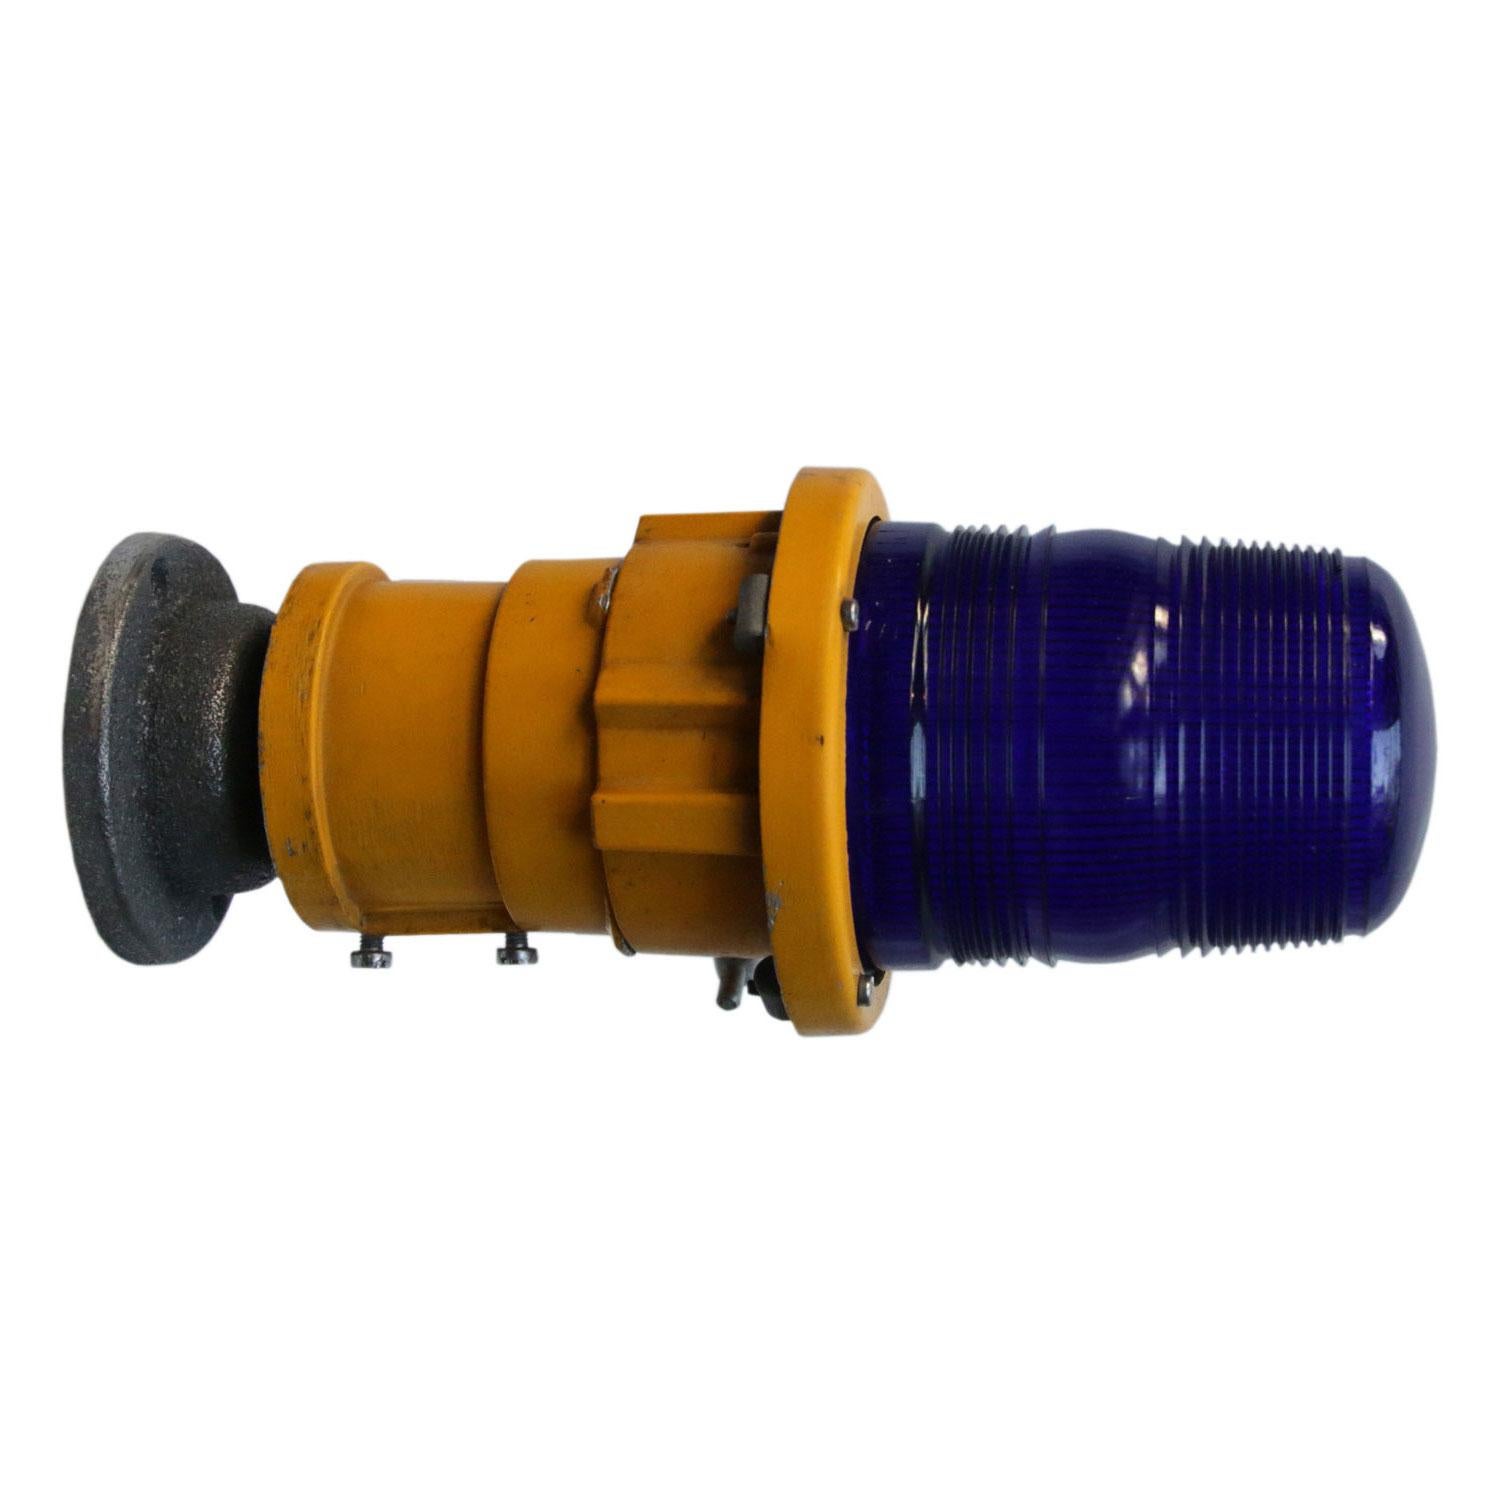 Runway light Airport Twente. Striped blue glass

Weight: 2.7 kg / 6 lb

Priced per individual item. All lamps have been made suitable by international standards for incandescent light bulbs, energy-efficient and LED bulbs. E26/E27 bulb holders and